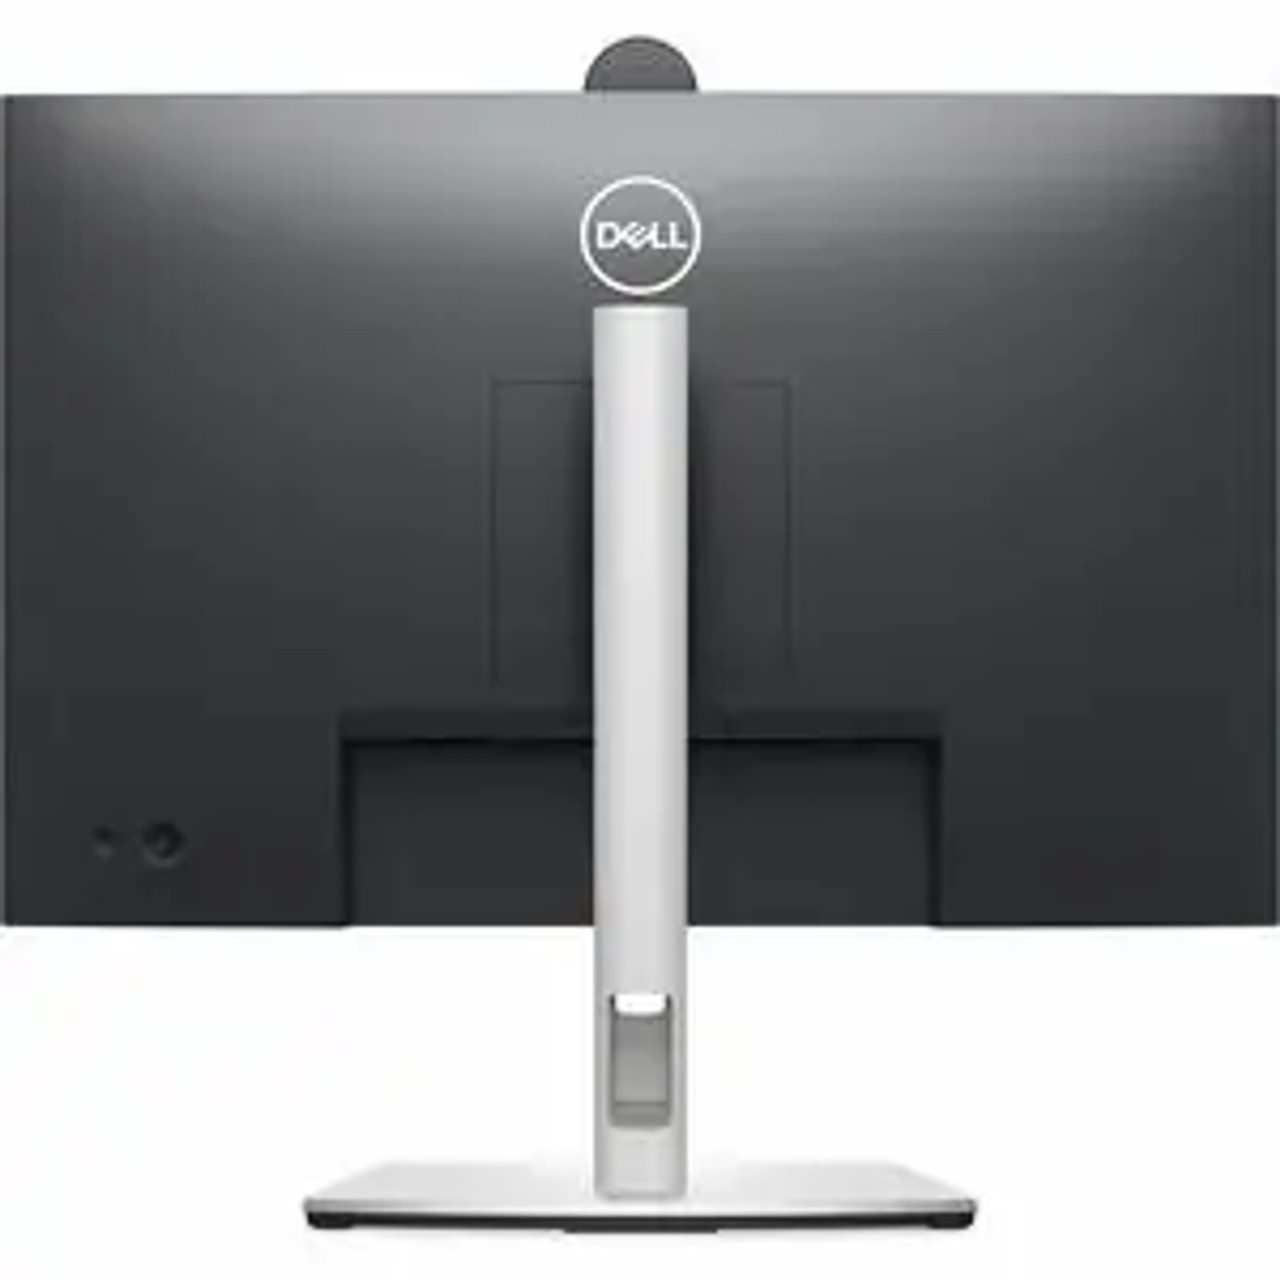 Dell P2424HEB 24" Class Webcam Full HD LED Monitor - 16:9 - 23.8" Viewable - In-plane Switching (IPS) Technology - LED Backlight - 1920 x 1080 - 16.7 Million Colors - 250 Nit - 5 ms GTG (Fast) - HDMI - DisplayPort - KVM Switch - DELL-P2424HEB